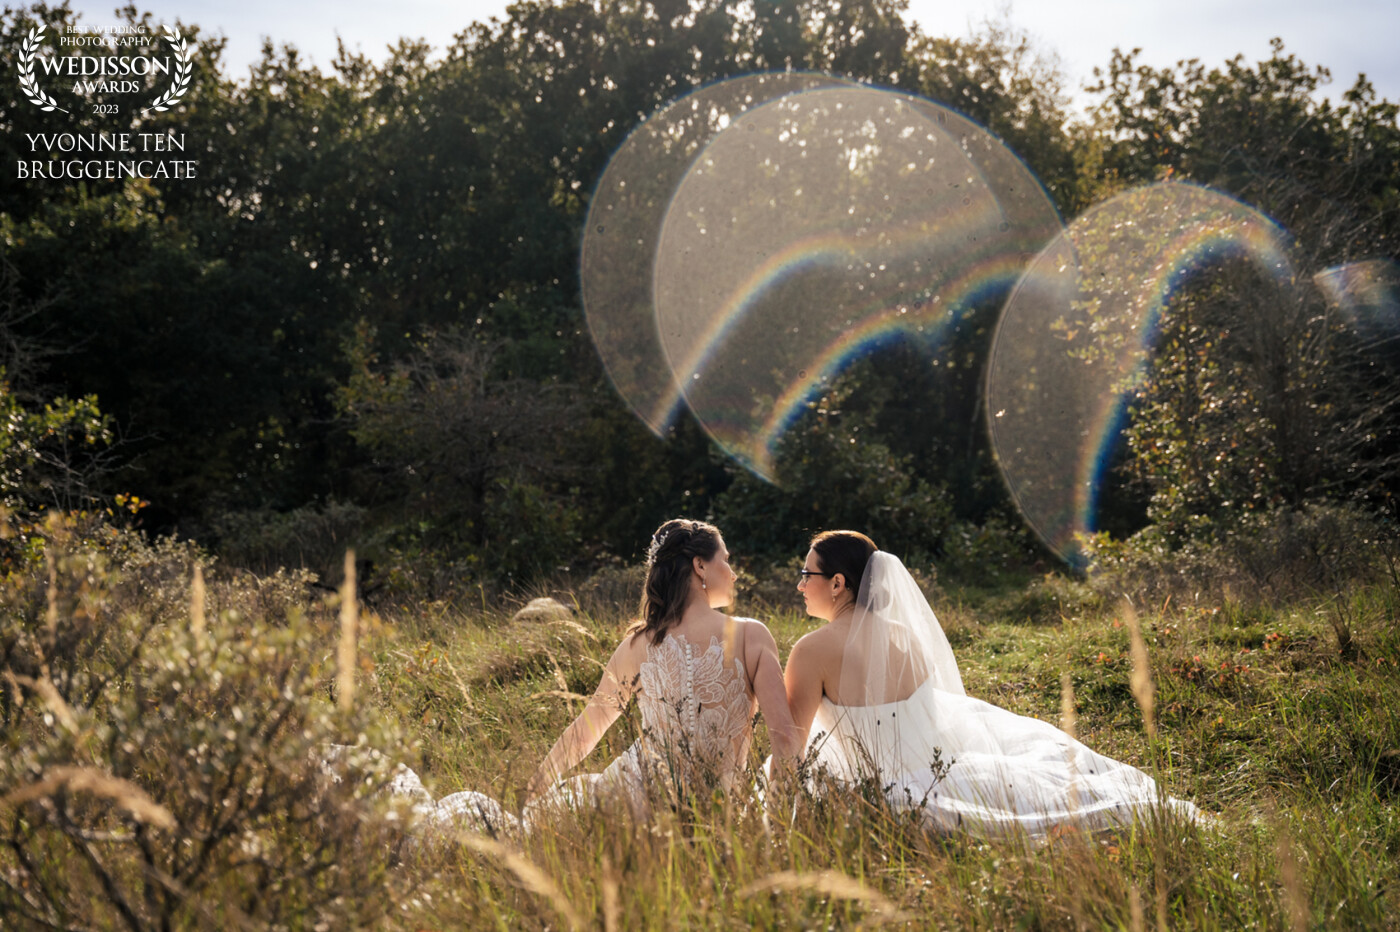 Of course I noticed the lens flare while capturing this beautiful wedding couple. When culling the images I notices the heart form of the flares and the beautiful rainbows. So special! Lots of love and happiness for these brides!